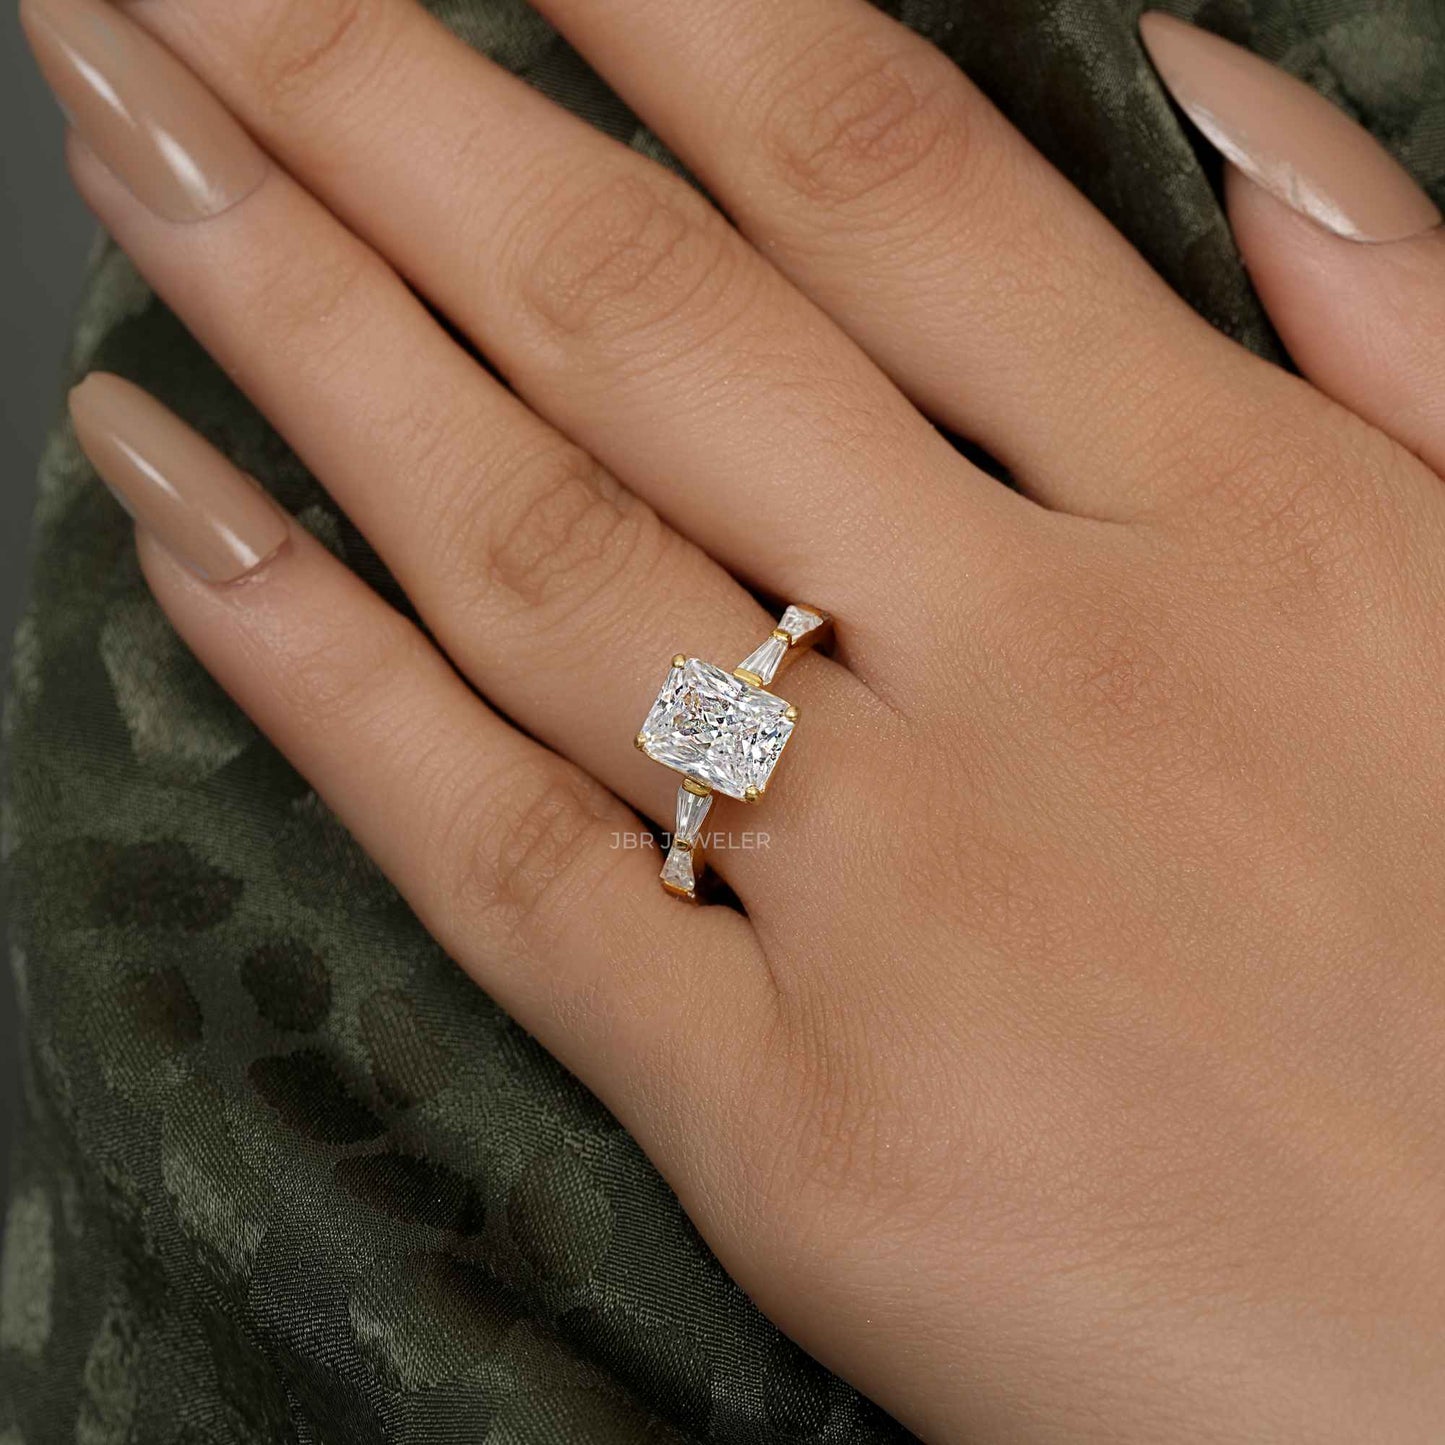 Radiant Cut Moissanite Engagement Ring with Side Stone Baguette